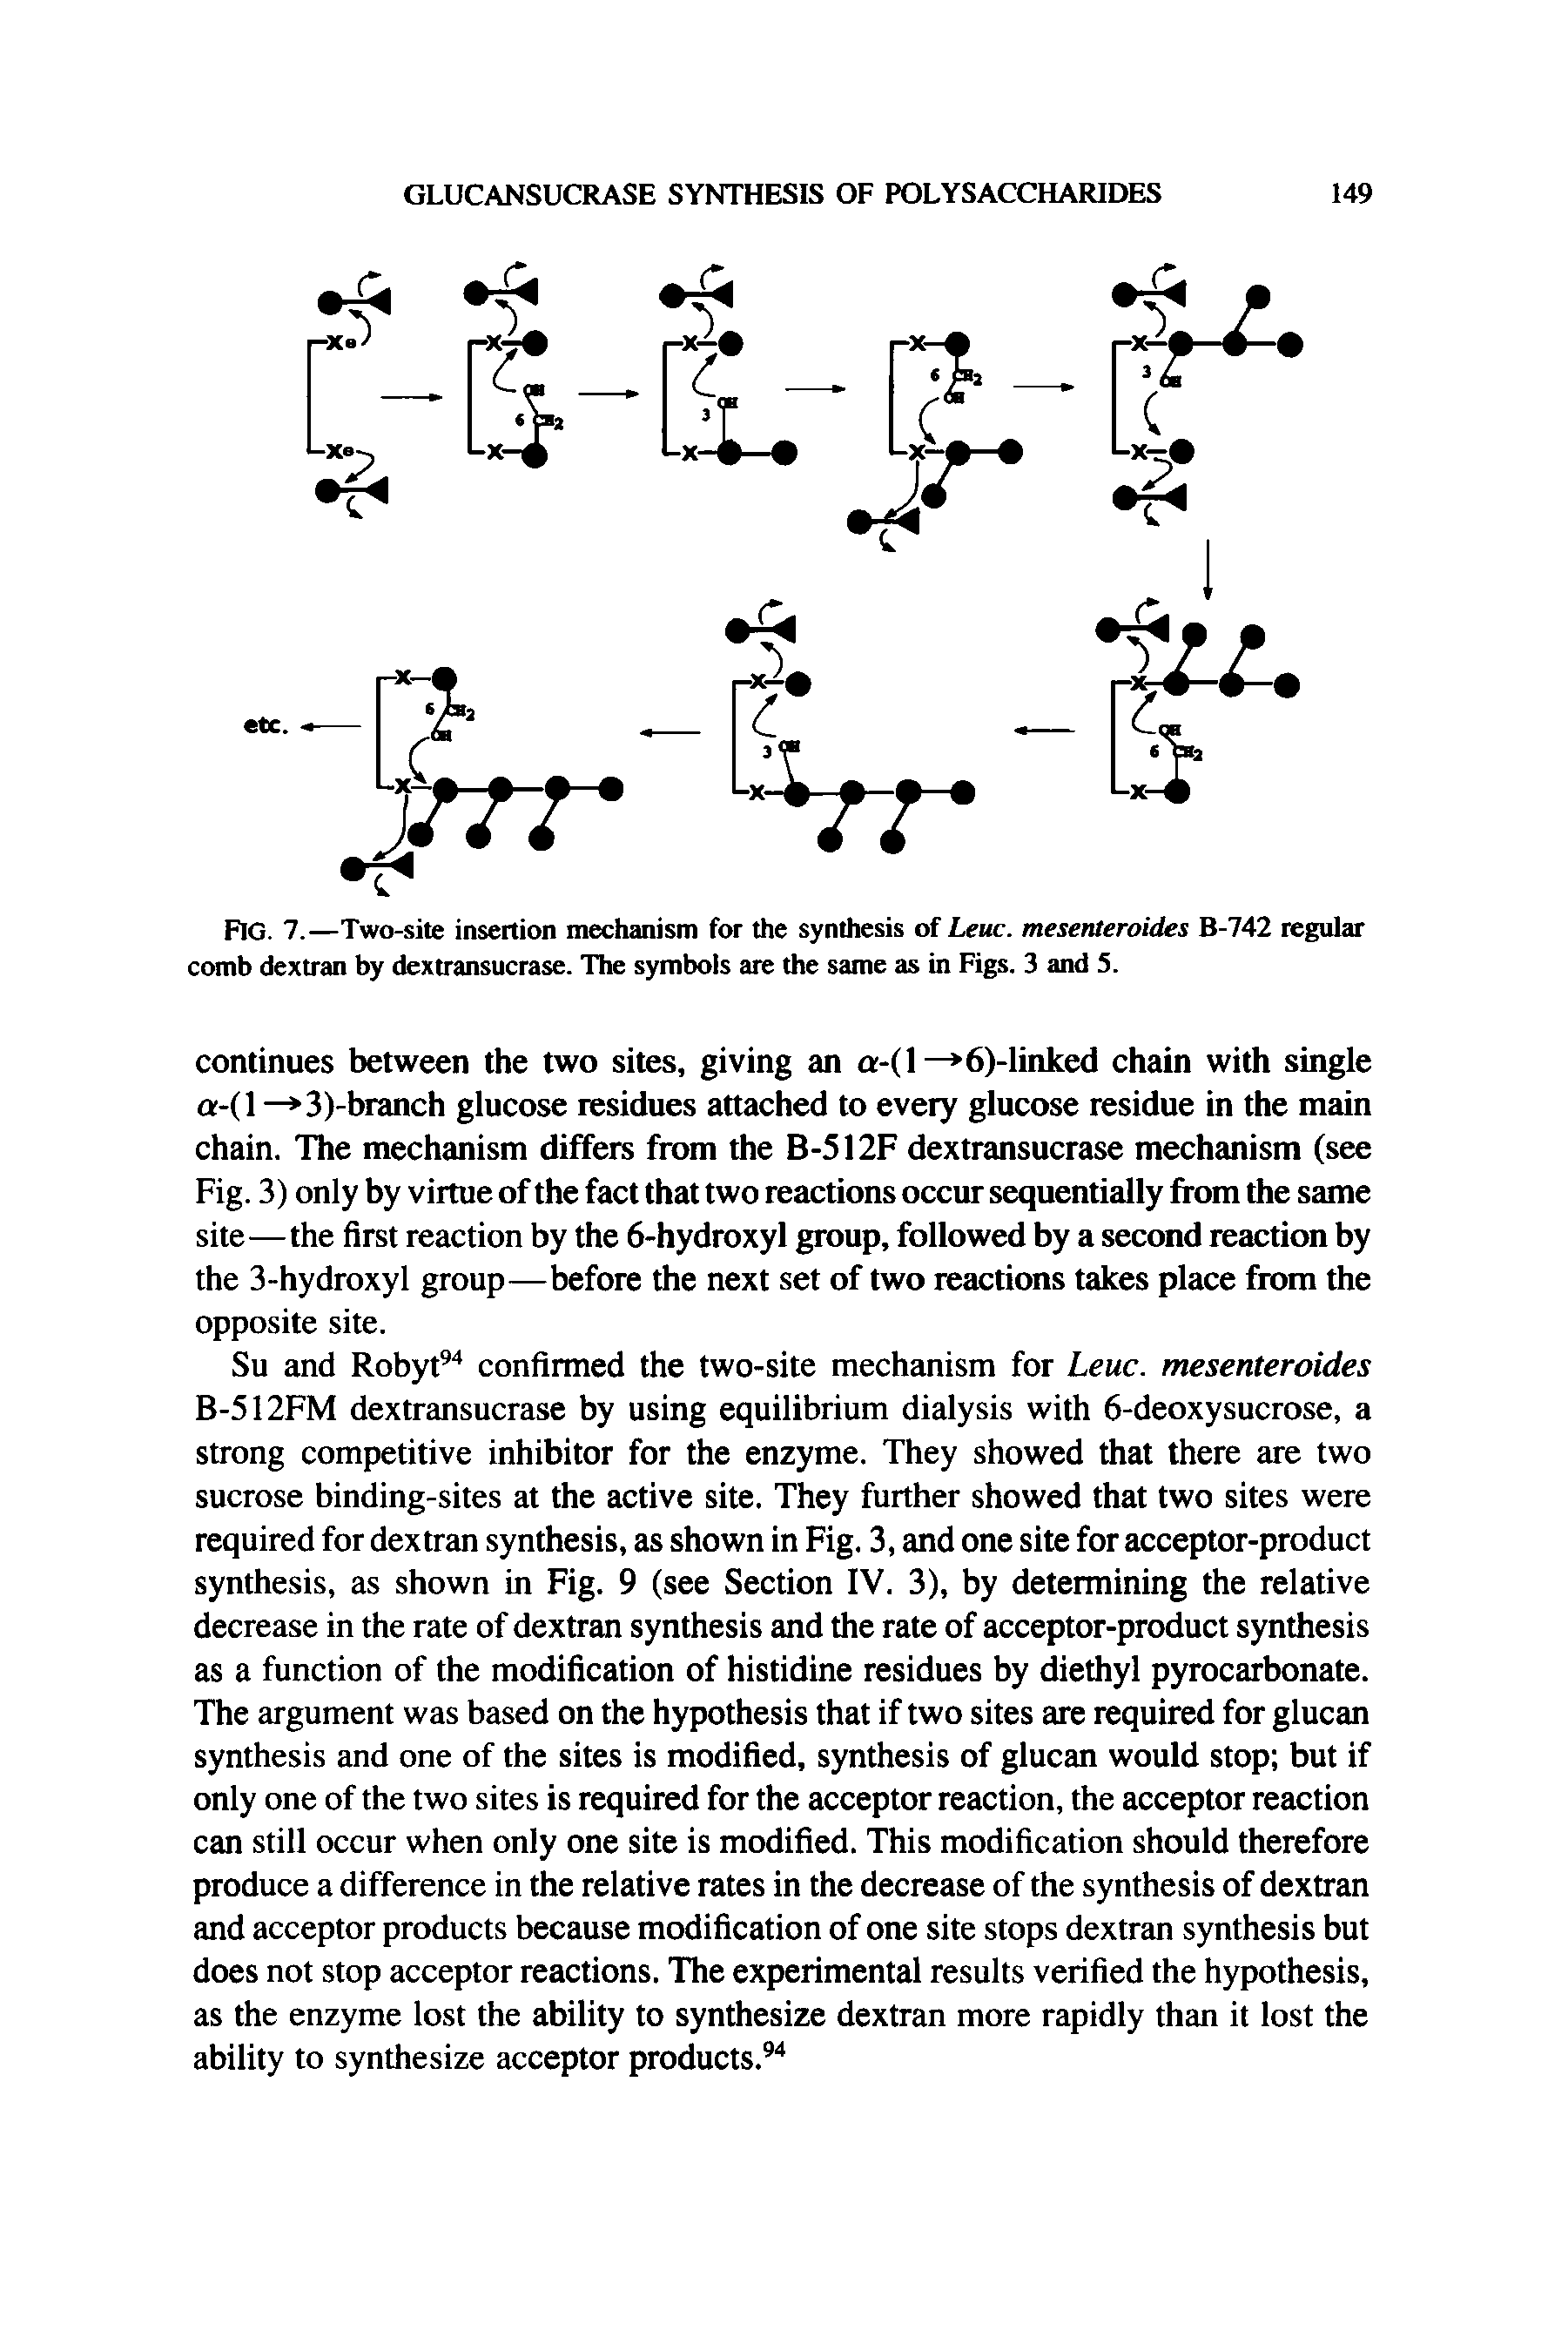 Fig. 7.—Two-site insertion mechanism for the synthesis of Leuc. mesenteroides B-742 regular comb dextran by dextransucrase. The symbols are the same as in Figs. 3 and 5.